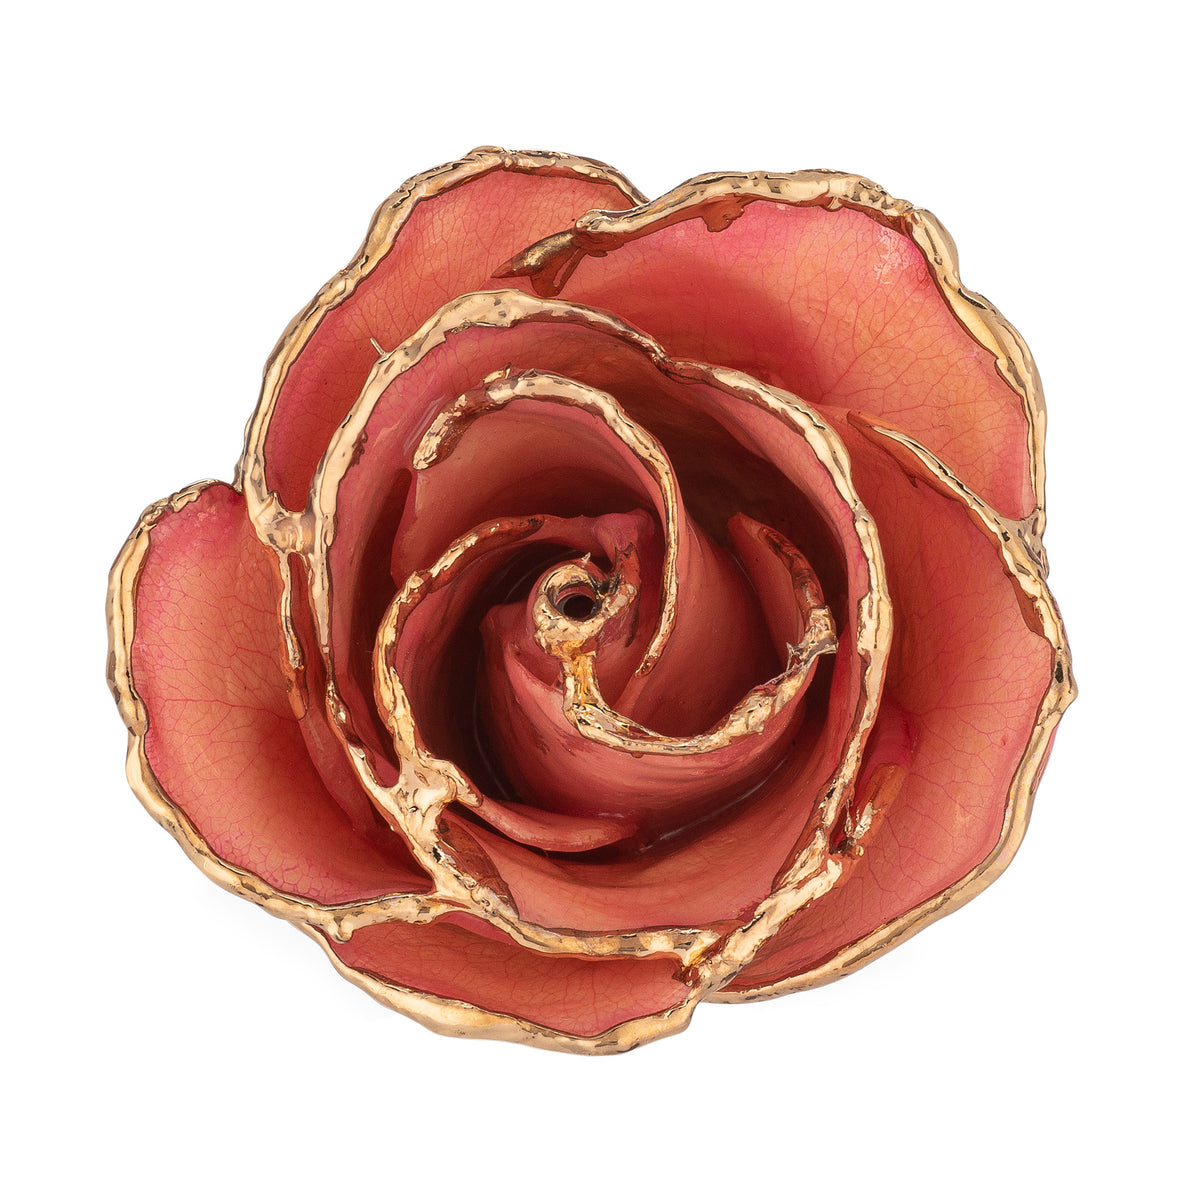 Top view of 24K Gold Trimmed Forever Rose with Pink Petals. View of Stem, Leaves, and Rose Petals and Showing Detail of Gold Trim